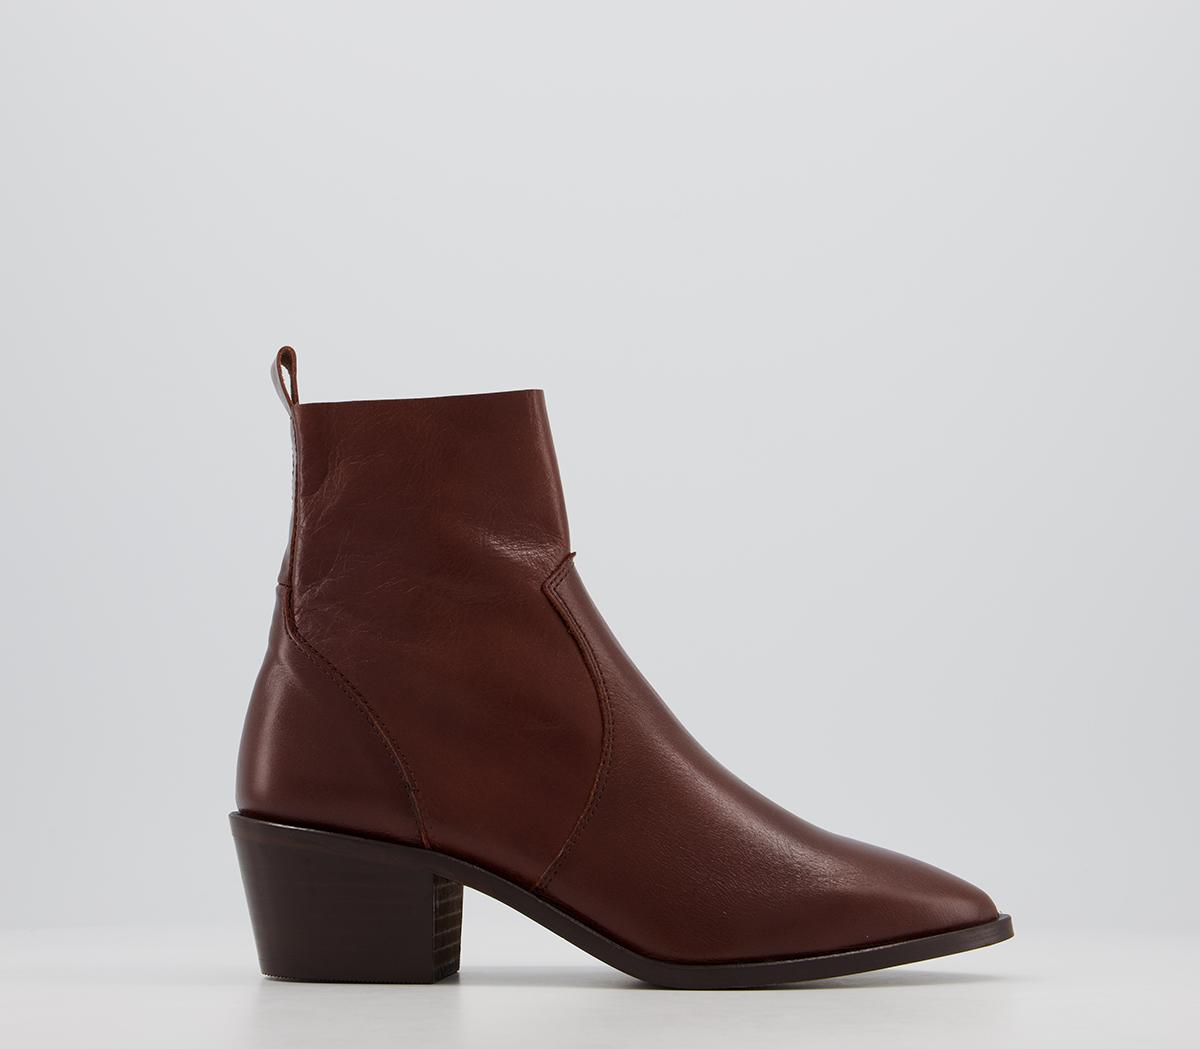 OFFICEAsher Casual Unlined BootsBrown Leather